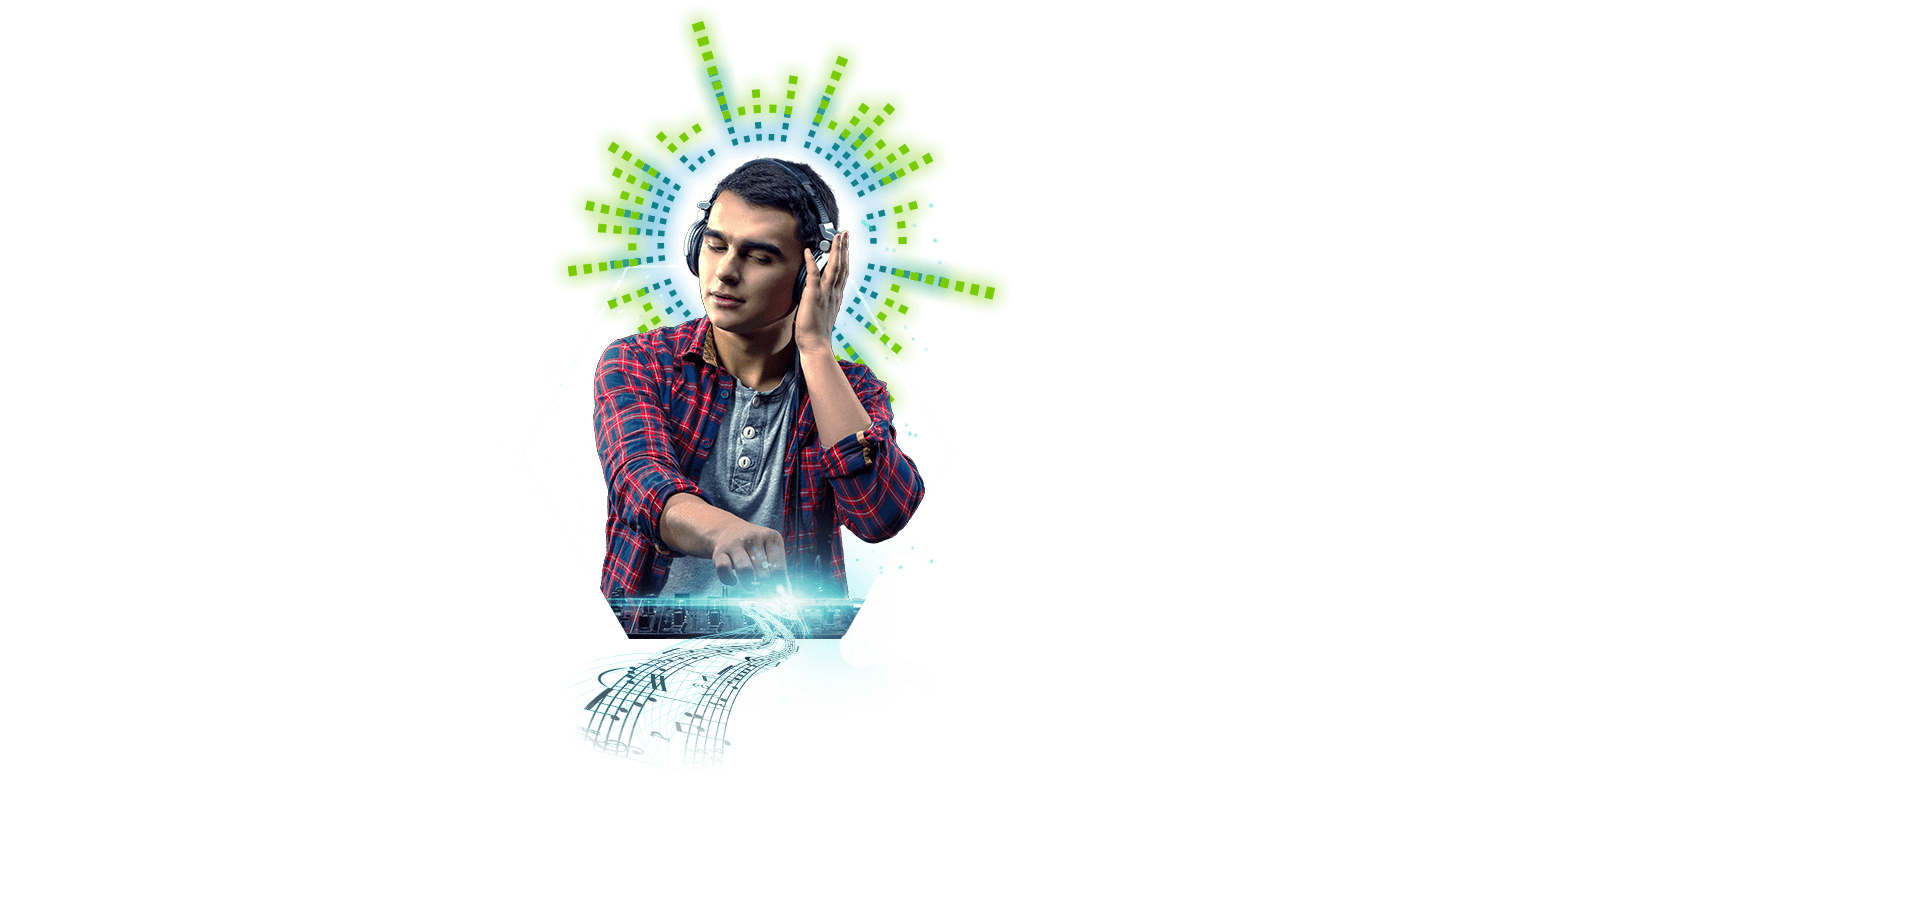 Composite portrait of a music producer mixing a song and listening to it on his headphones. Equalizer bars burst around his head like a halo, and a line of music flows from his fingertips.